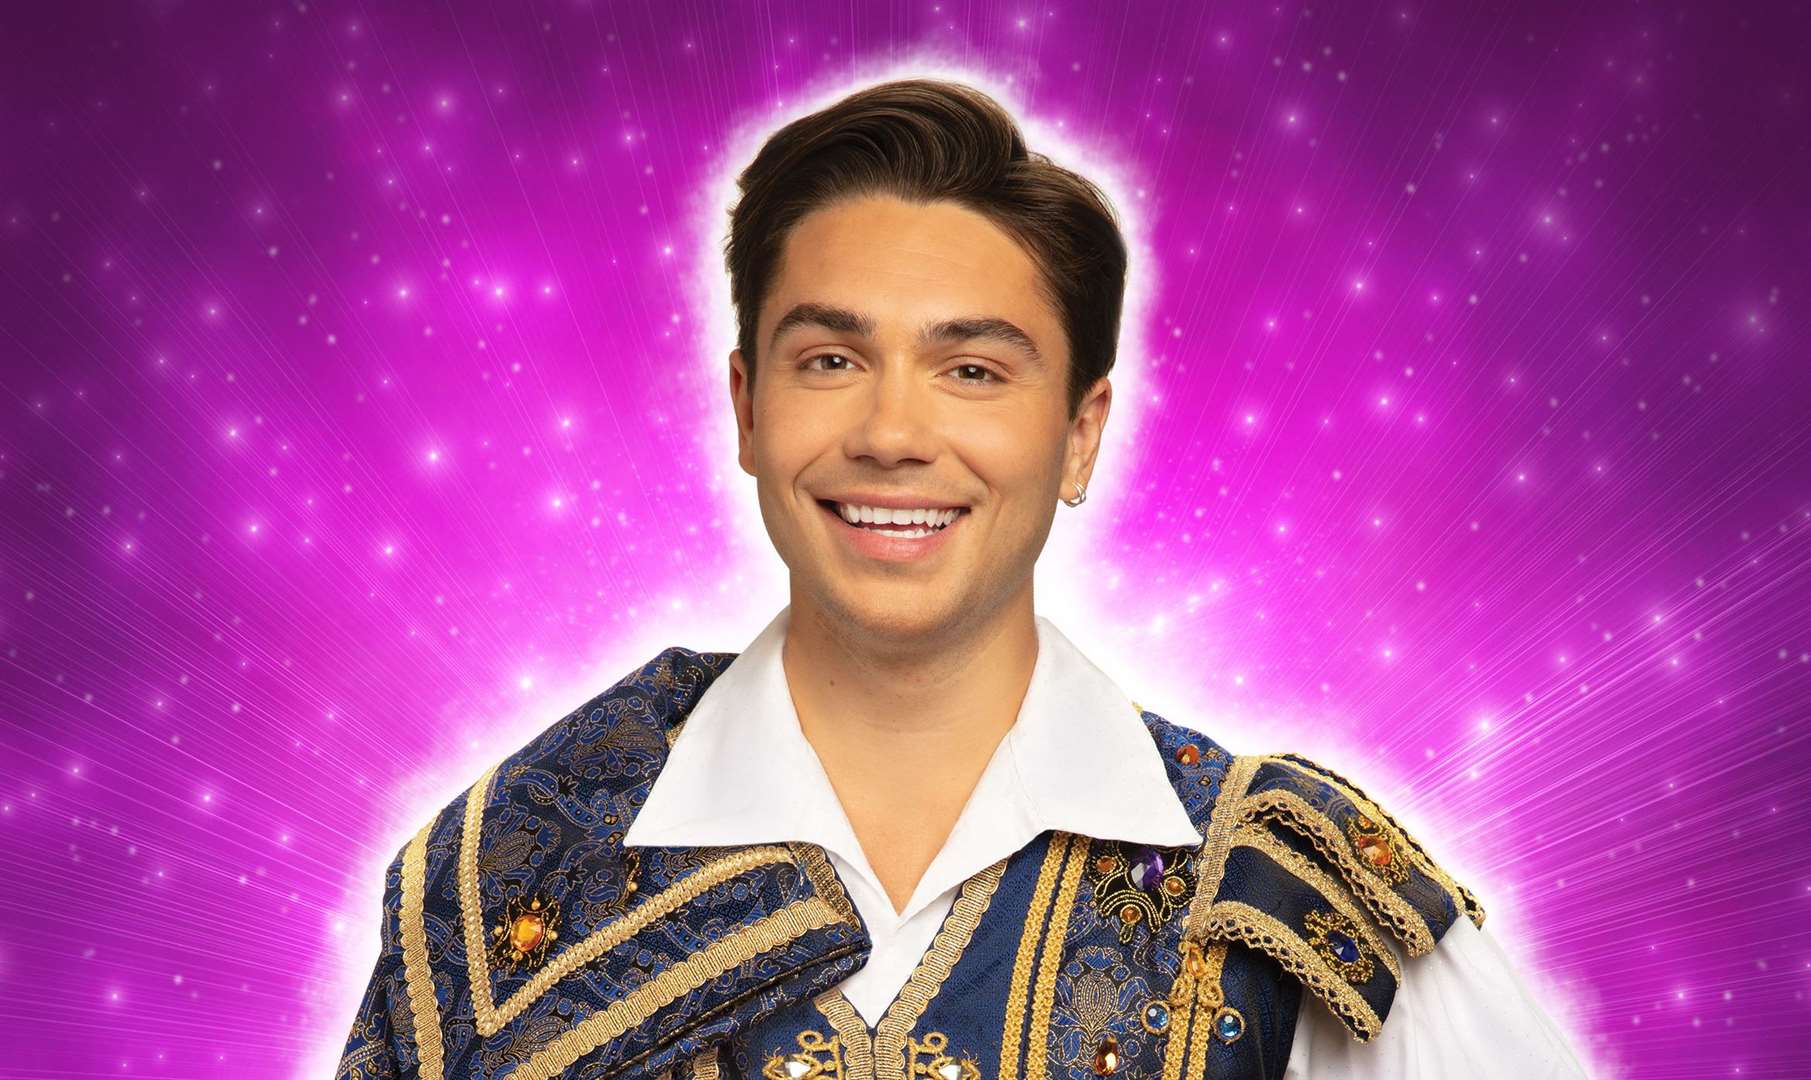 Ellie will be joined by Union J's George Shelley, pictured, who is also making his pantomime debut as Prince Charming